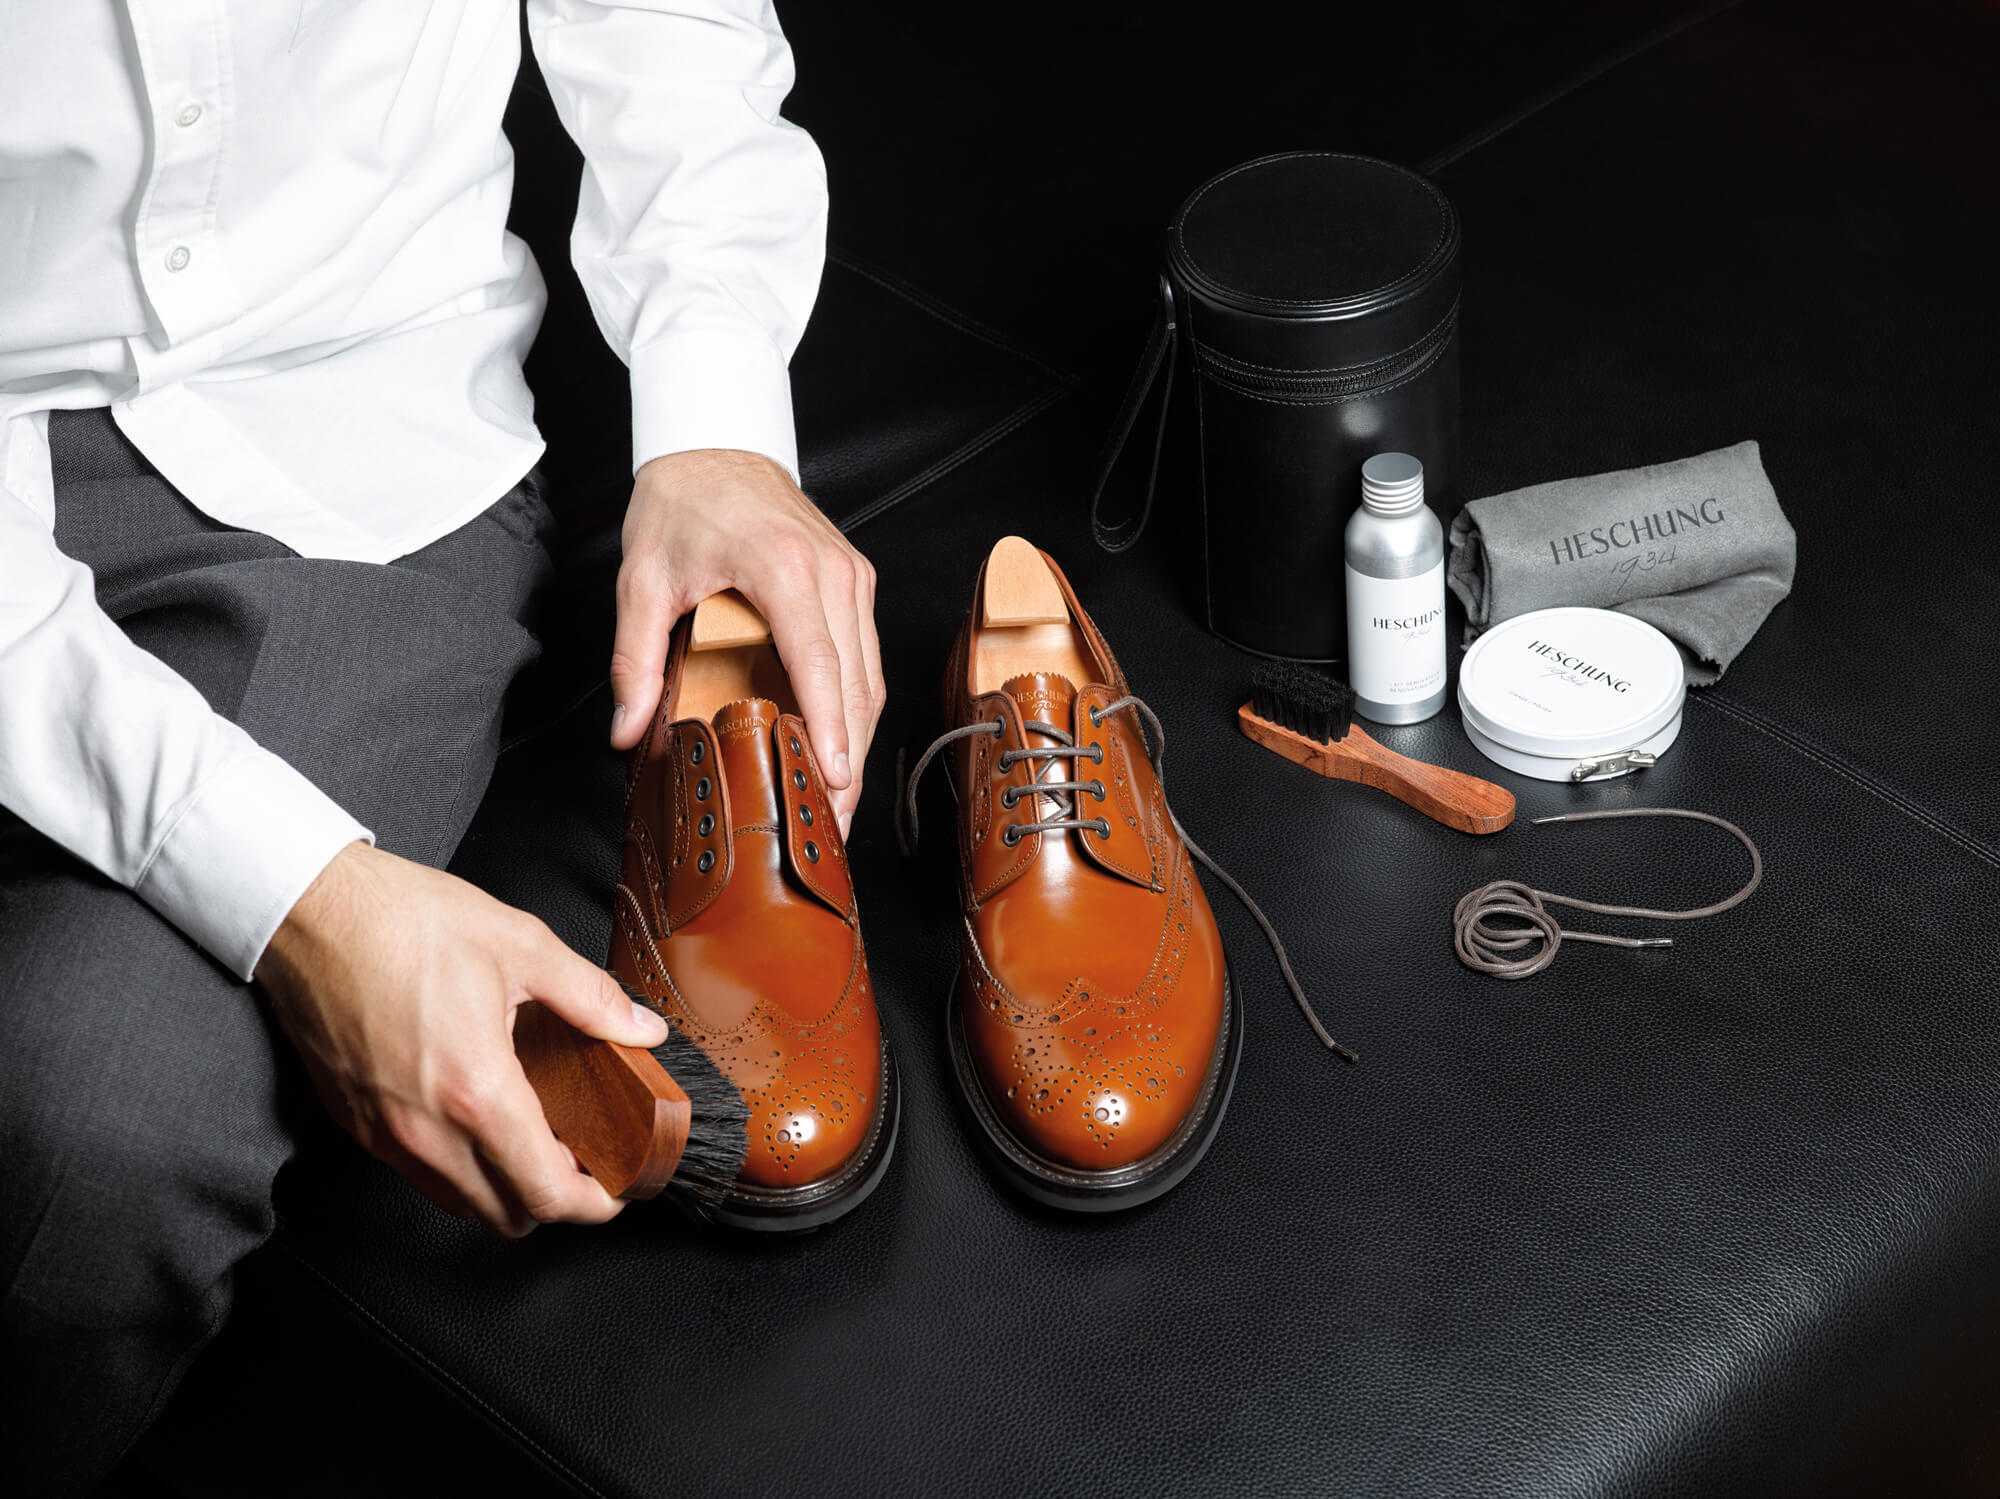 The art of shoe care